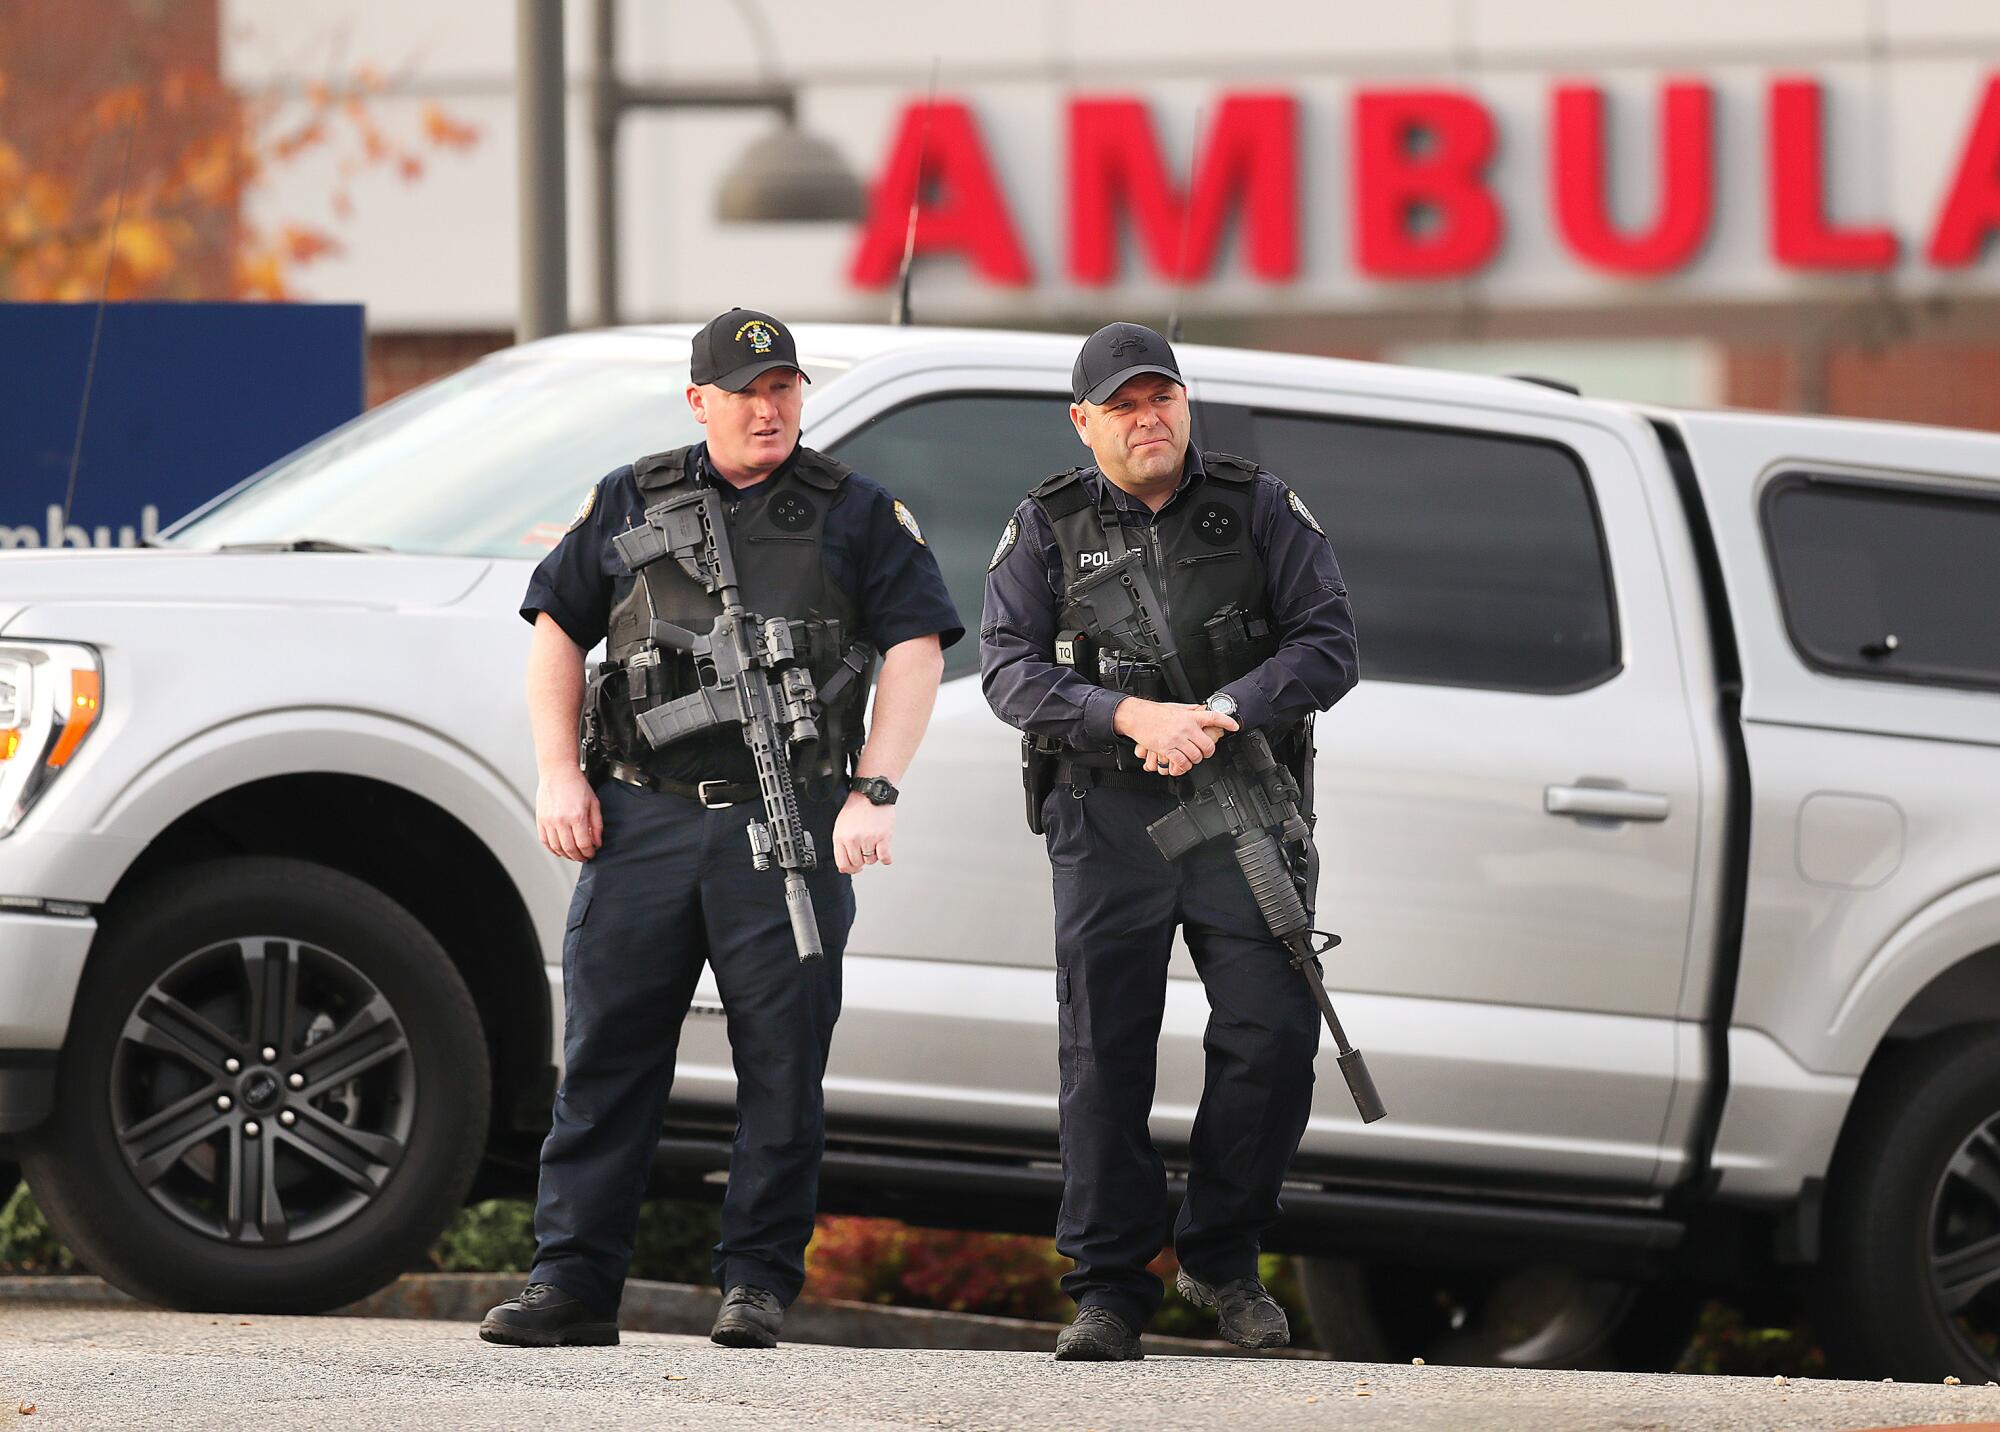 Two police officers with large rifles standing next to a vehicle outside a hospital